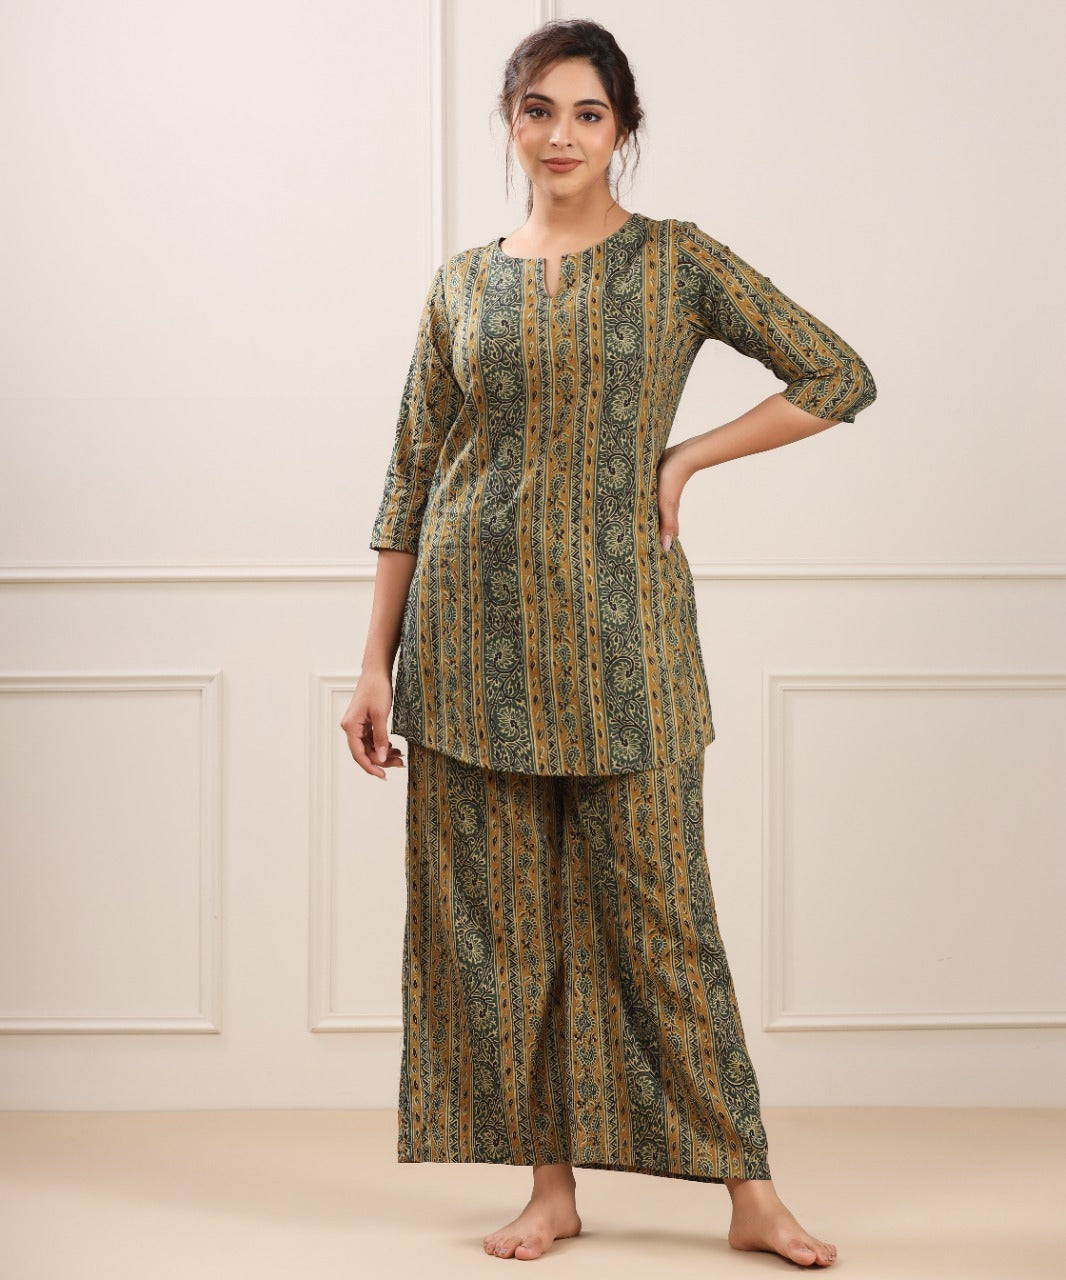 Traditional parallels on Green Cotton Loungewear Set